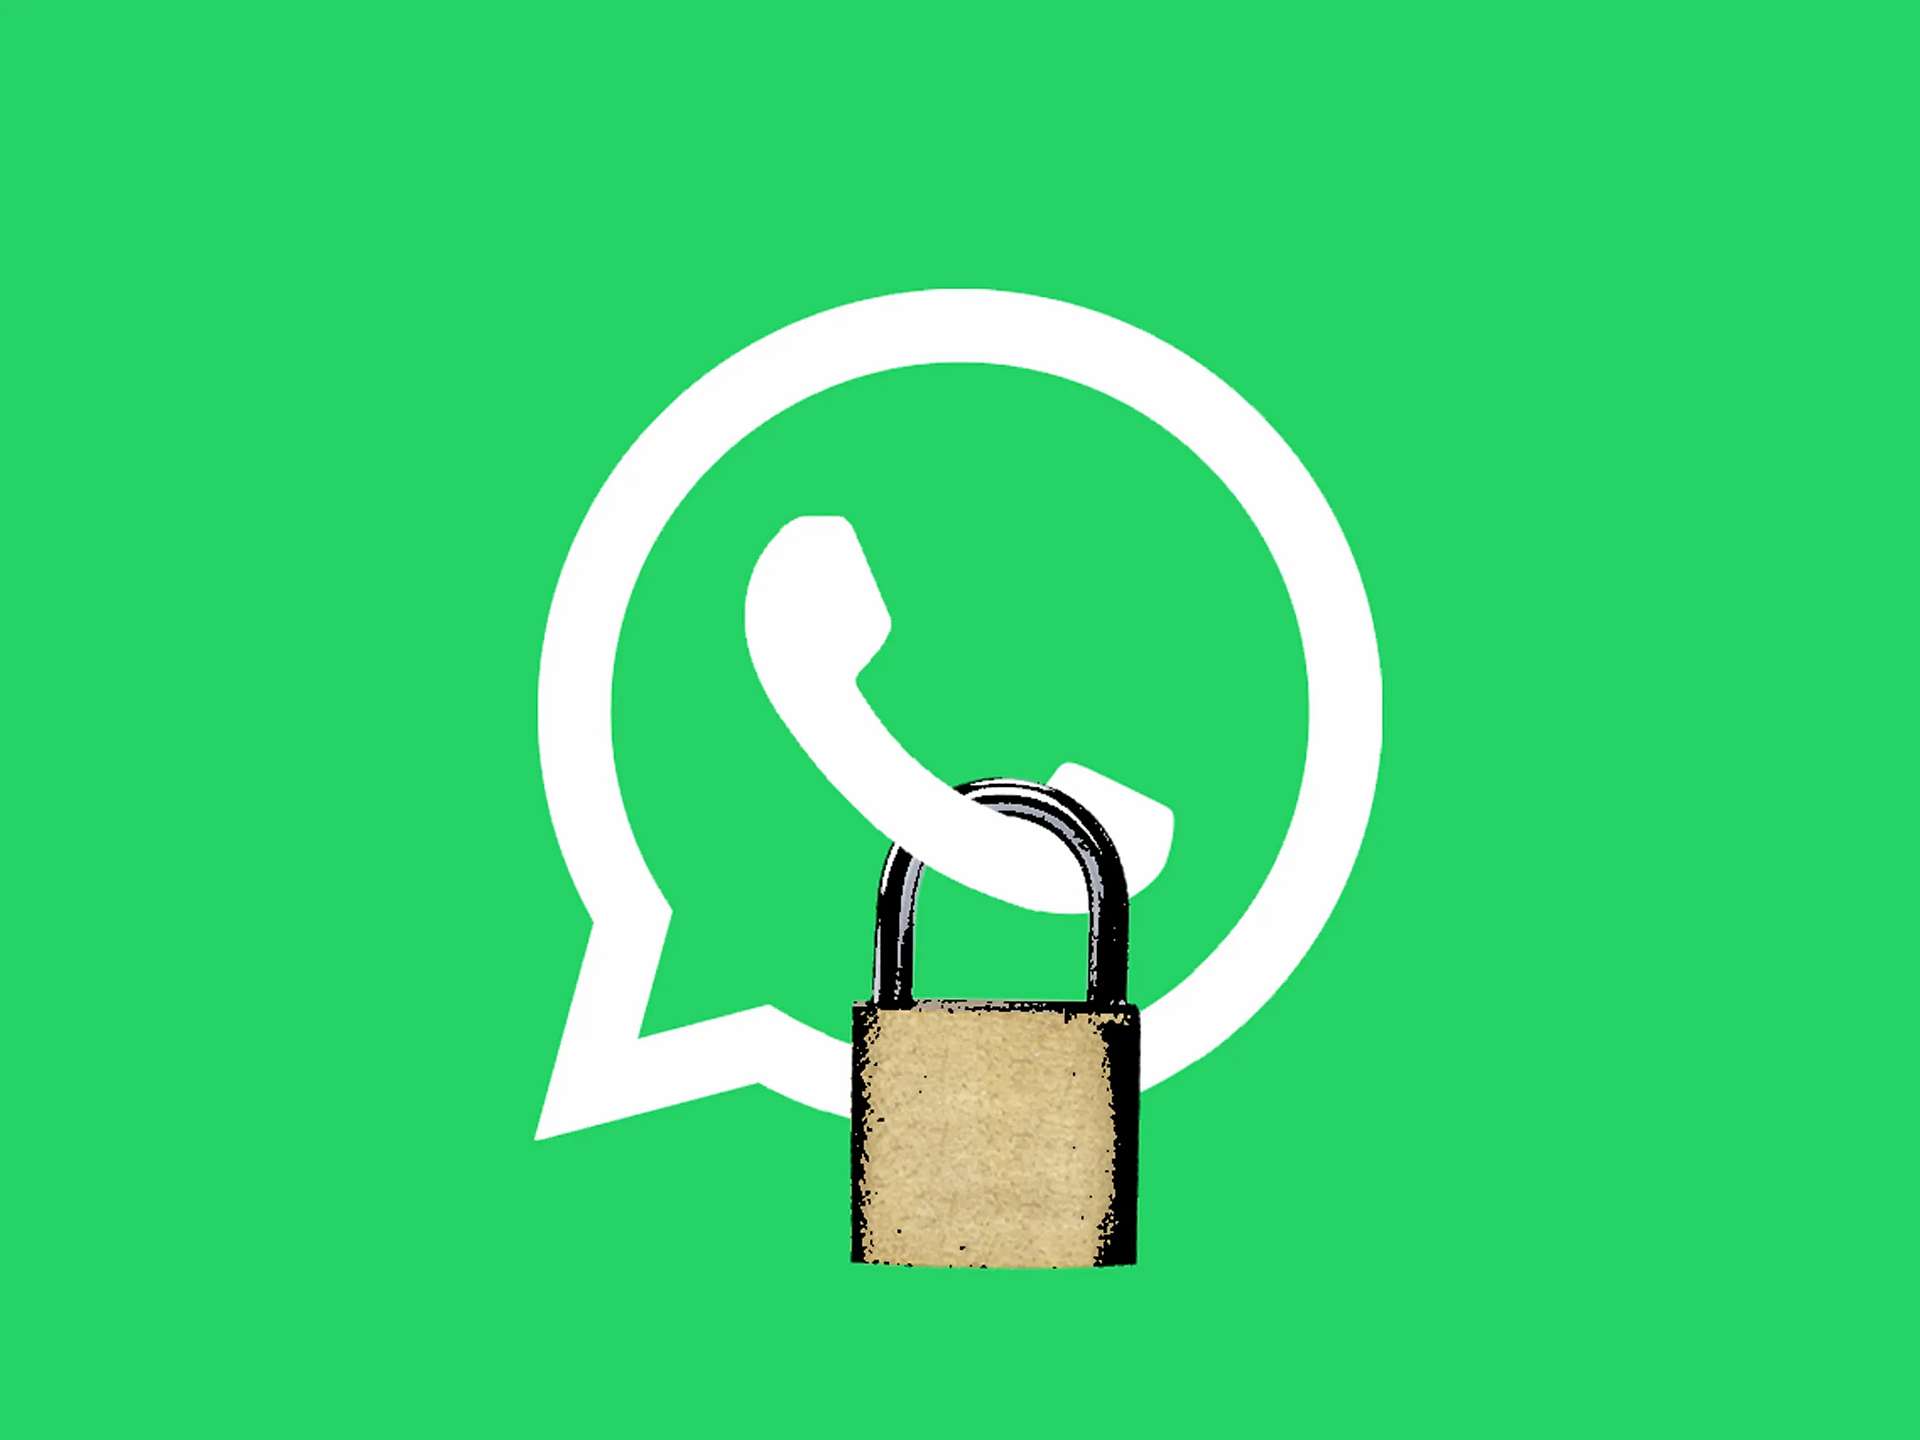 How to hide last seen on Whatsapp for one person?